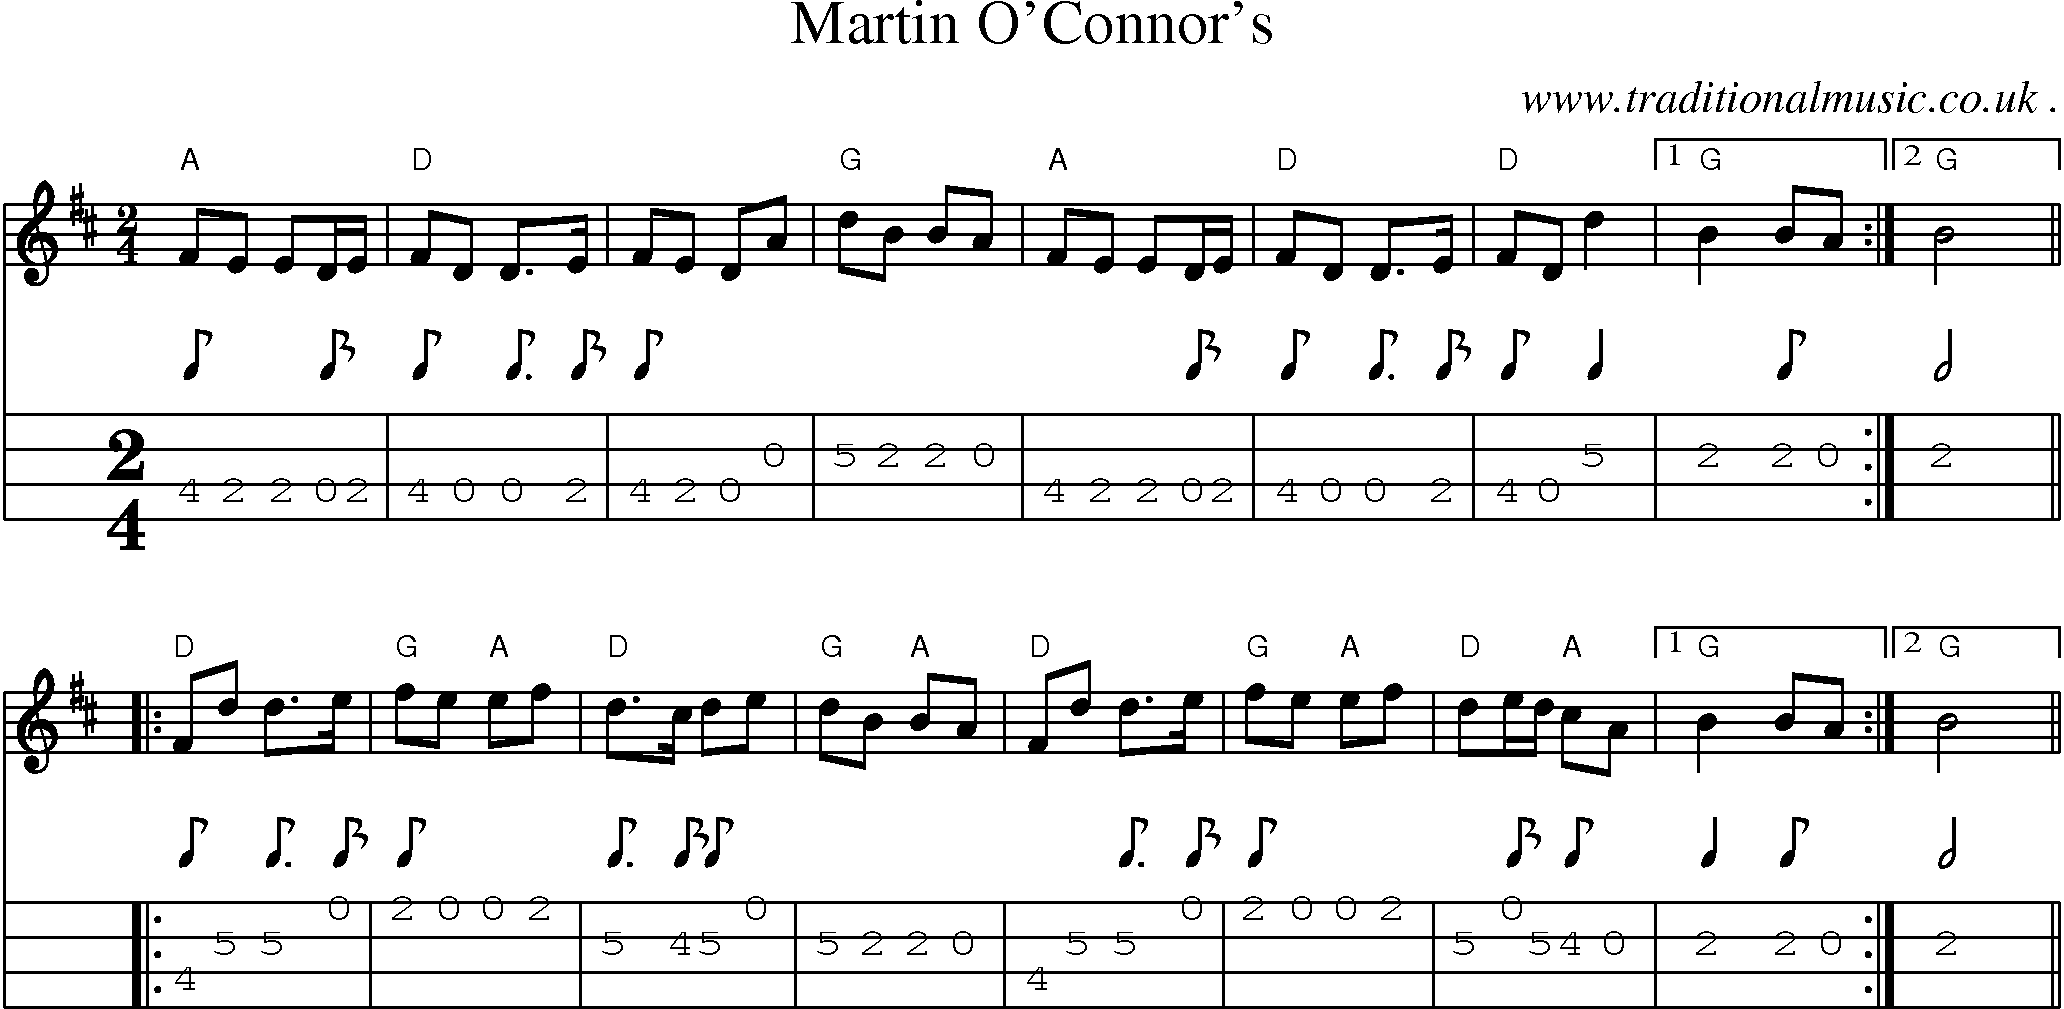 Music Score and Guitar Tabs for Martin Oconnors